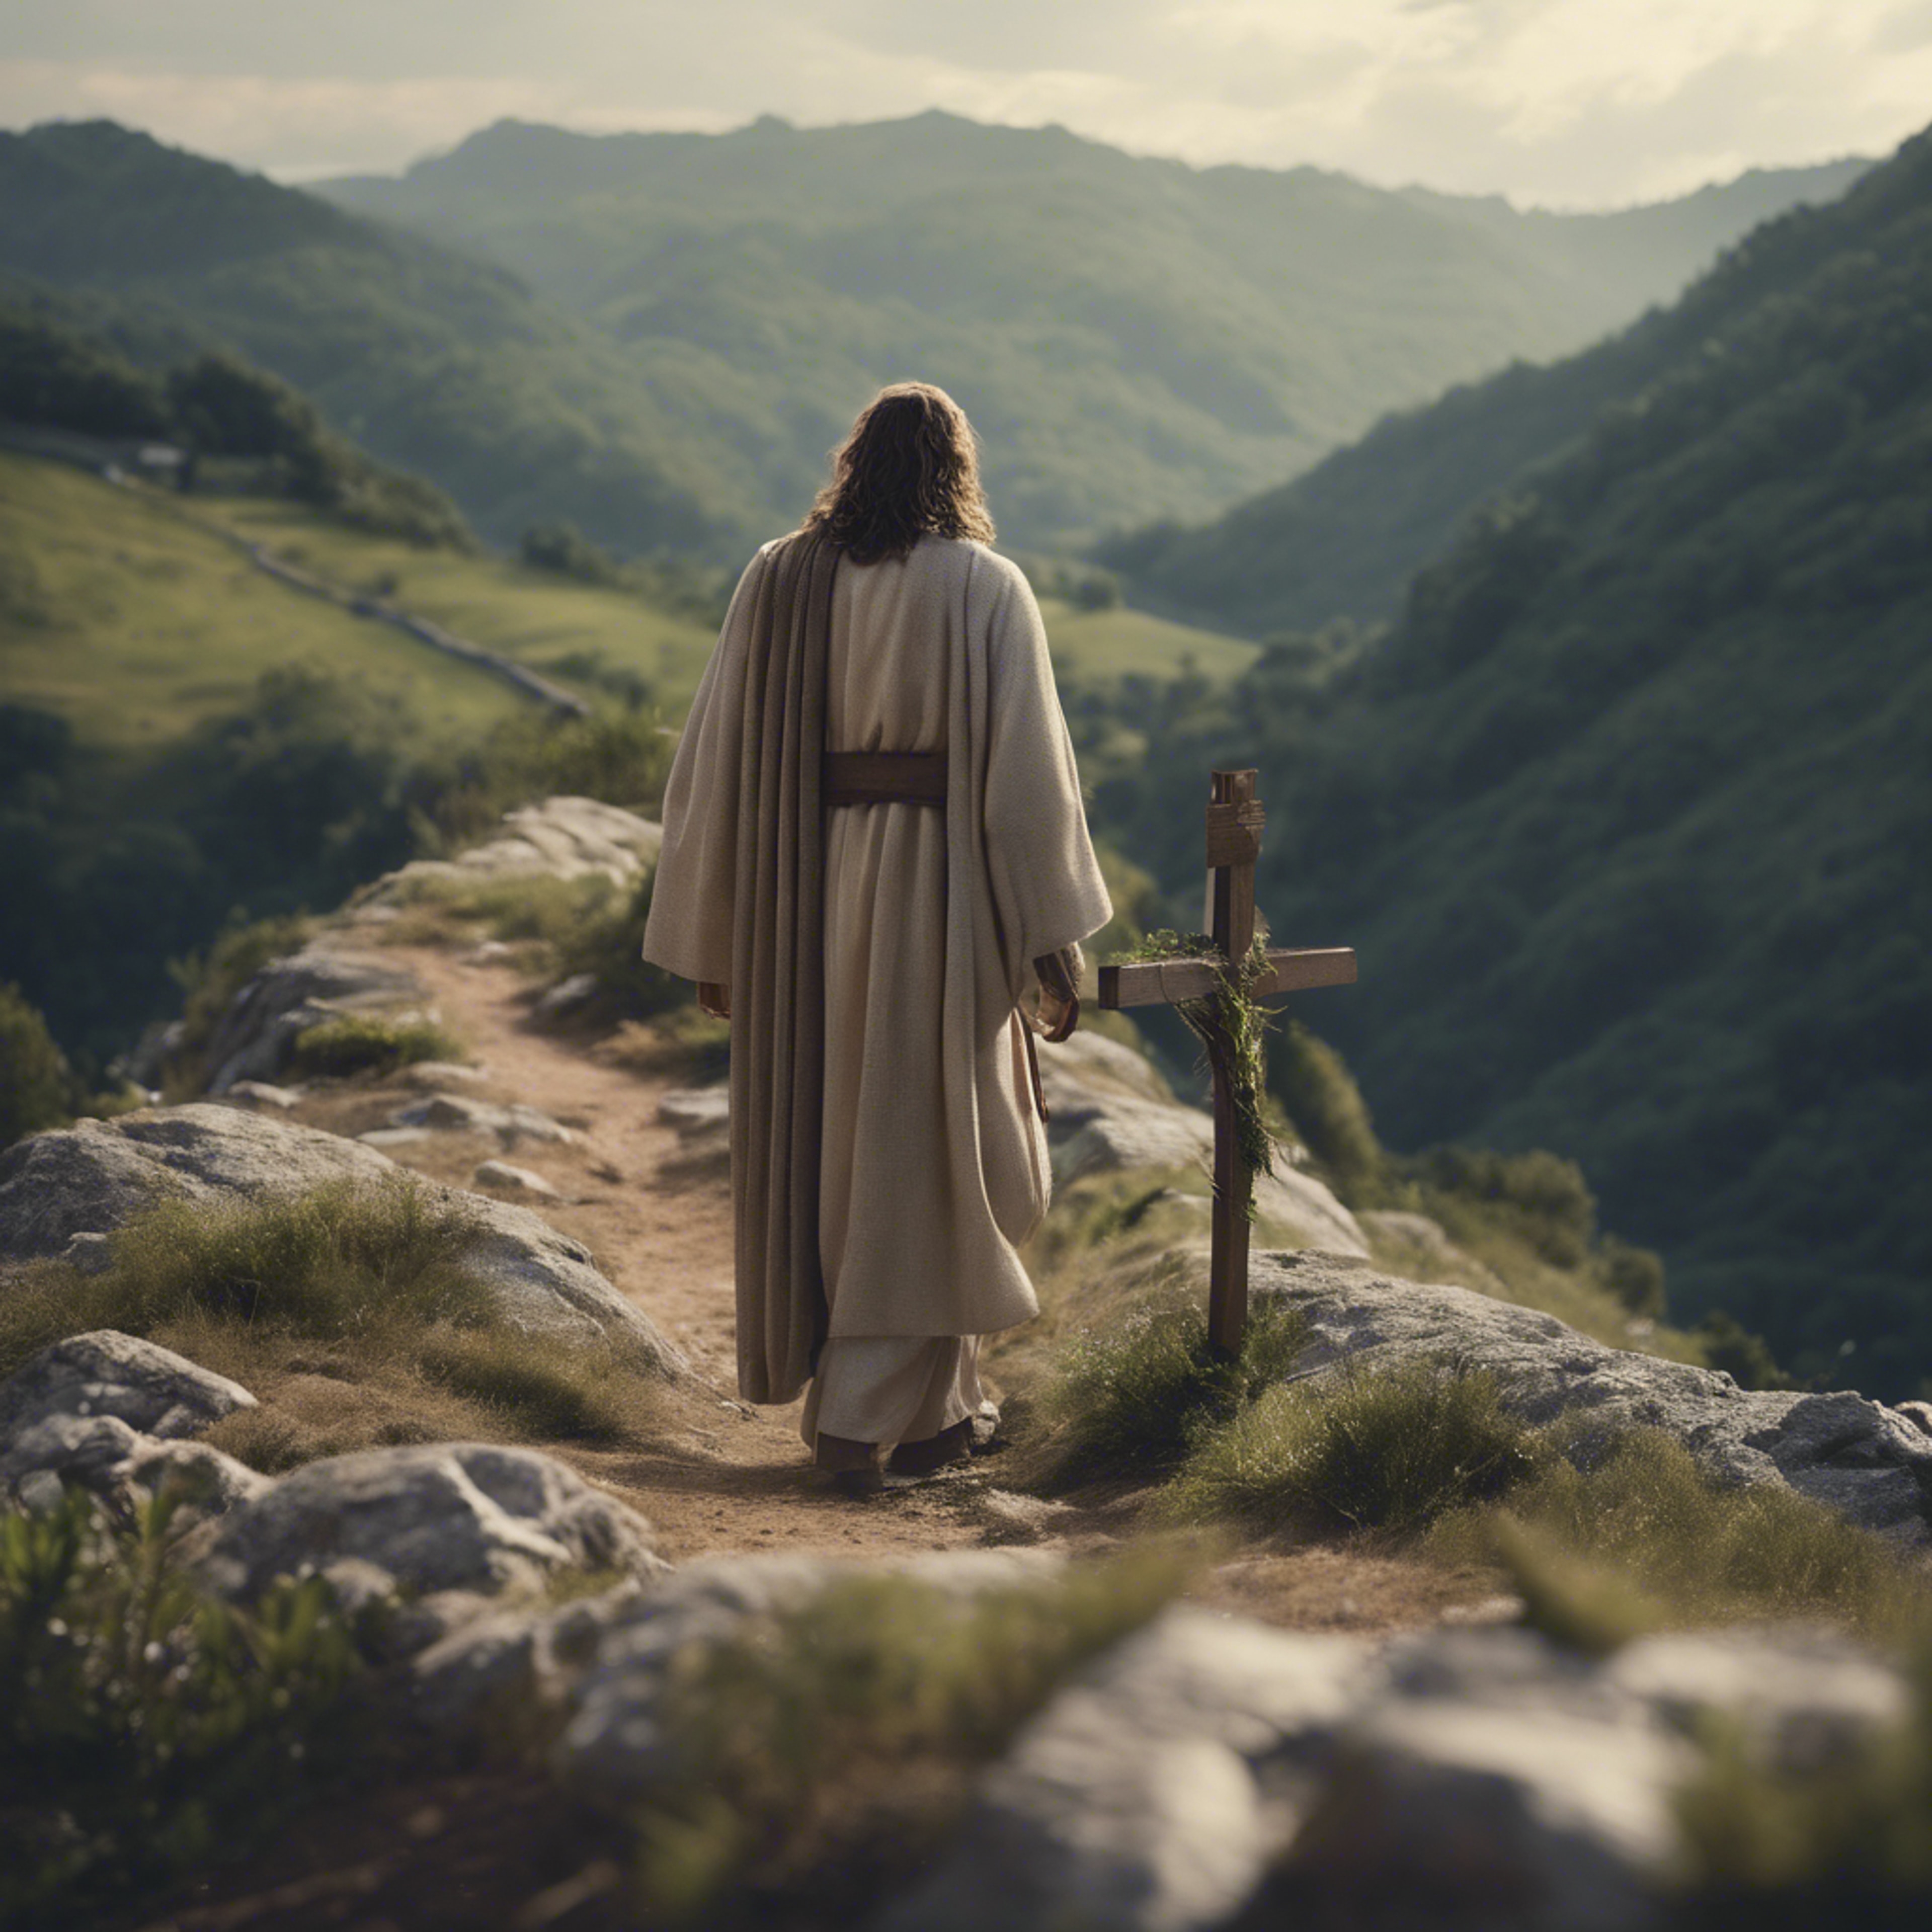 A somber yet inspiring scene of Jesus carrying the cross along a winding mountain path. Валлпапер[cec6dd957e1b48d0bb97]